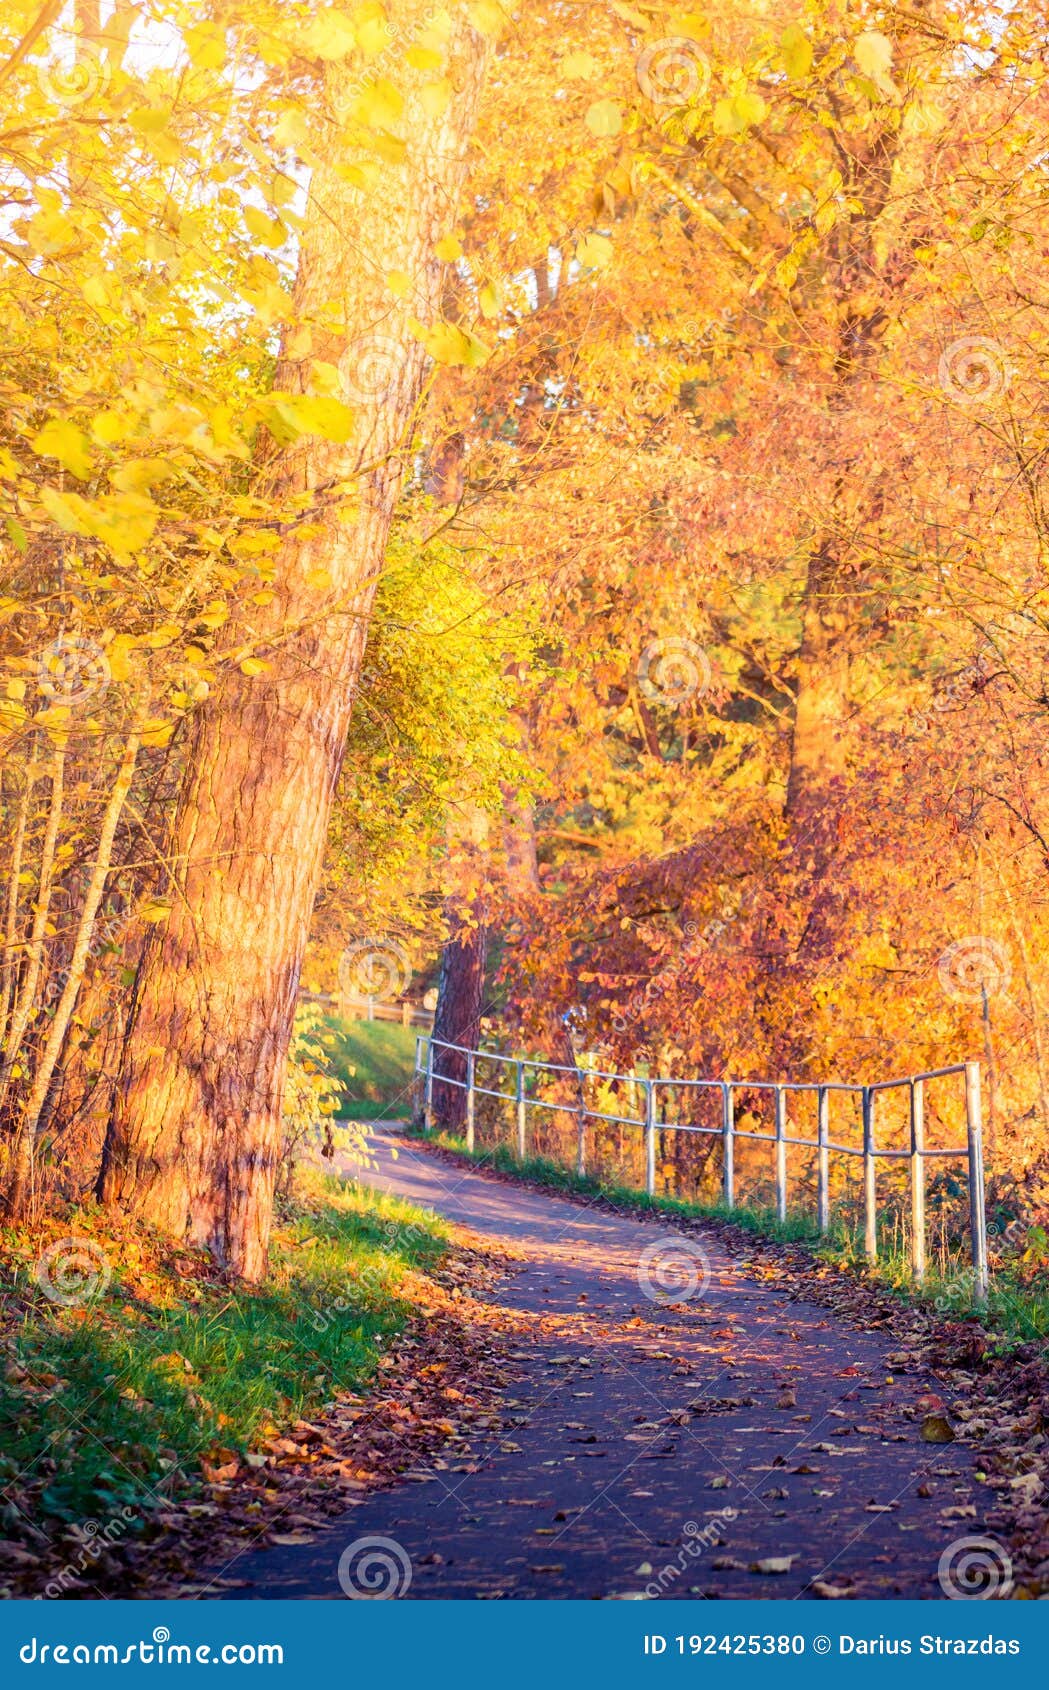 Fall Autumn Path, Golden Tree Leaves Stock Photo - Image of landscape,  outdoor: 192425380